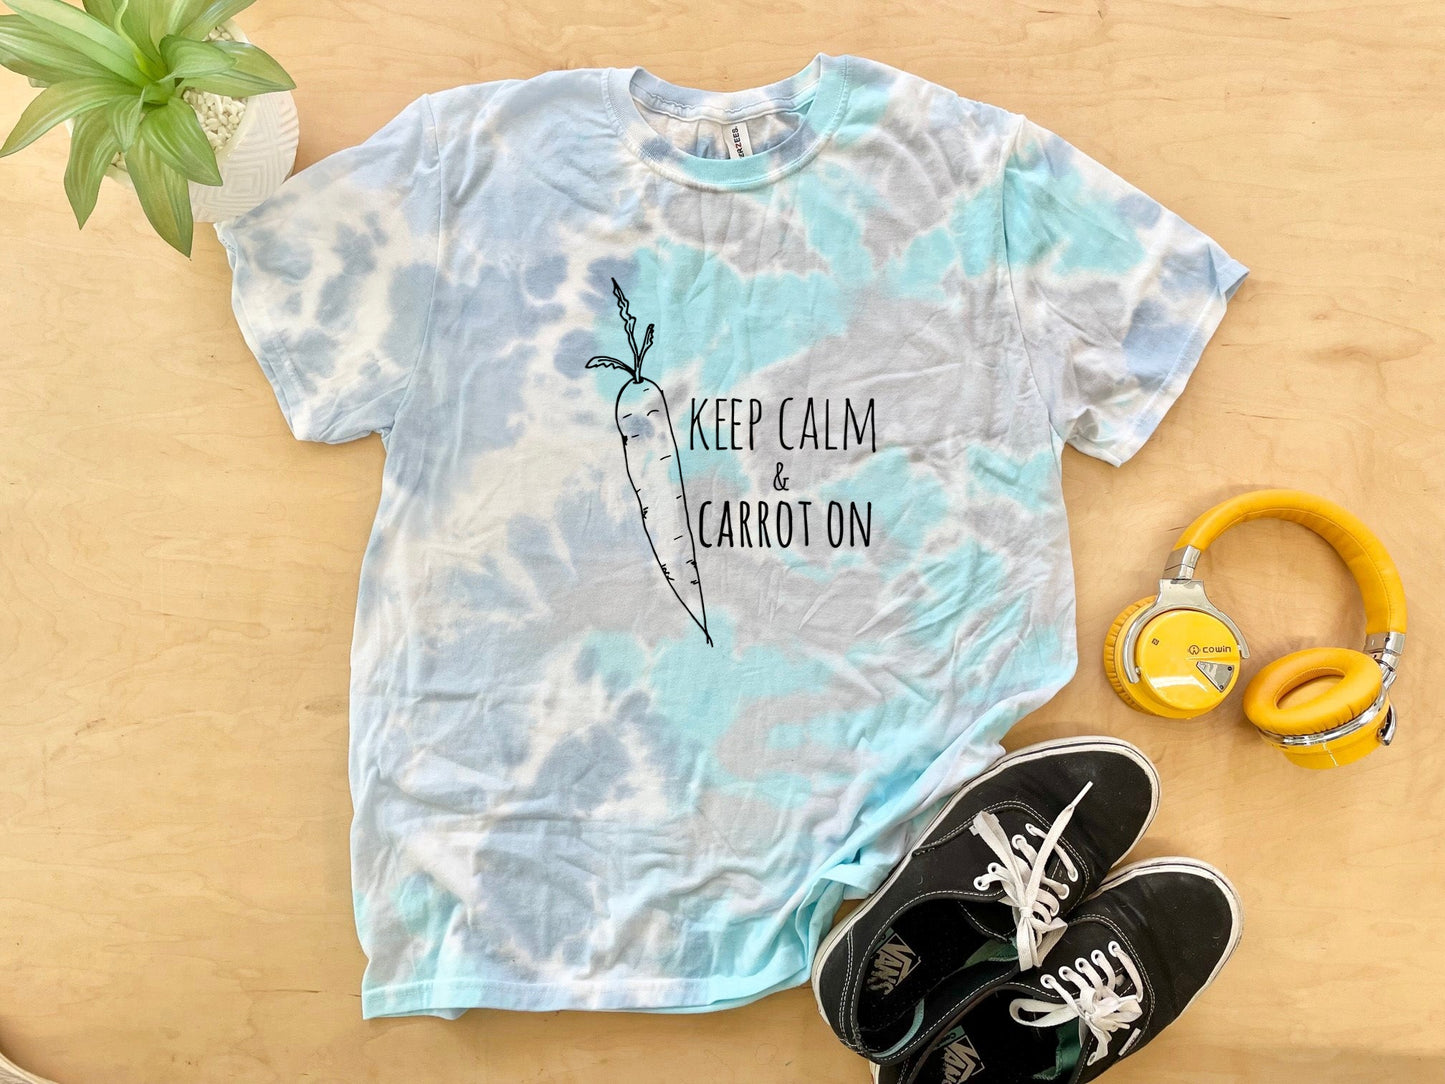 Keep Calm and Carrot On - Mens/Unisex Tie Dye Tee - Blue